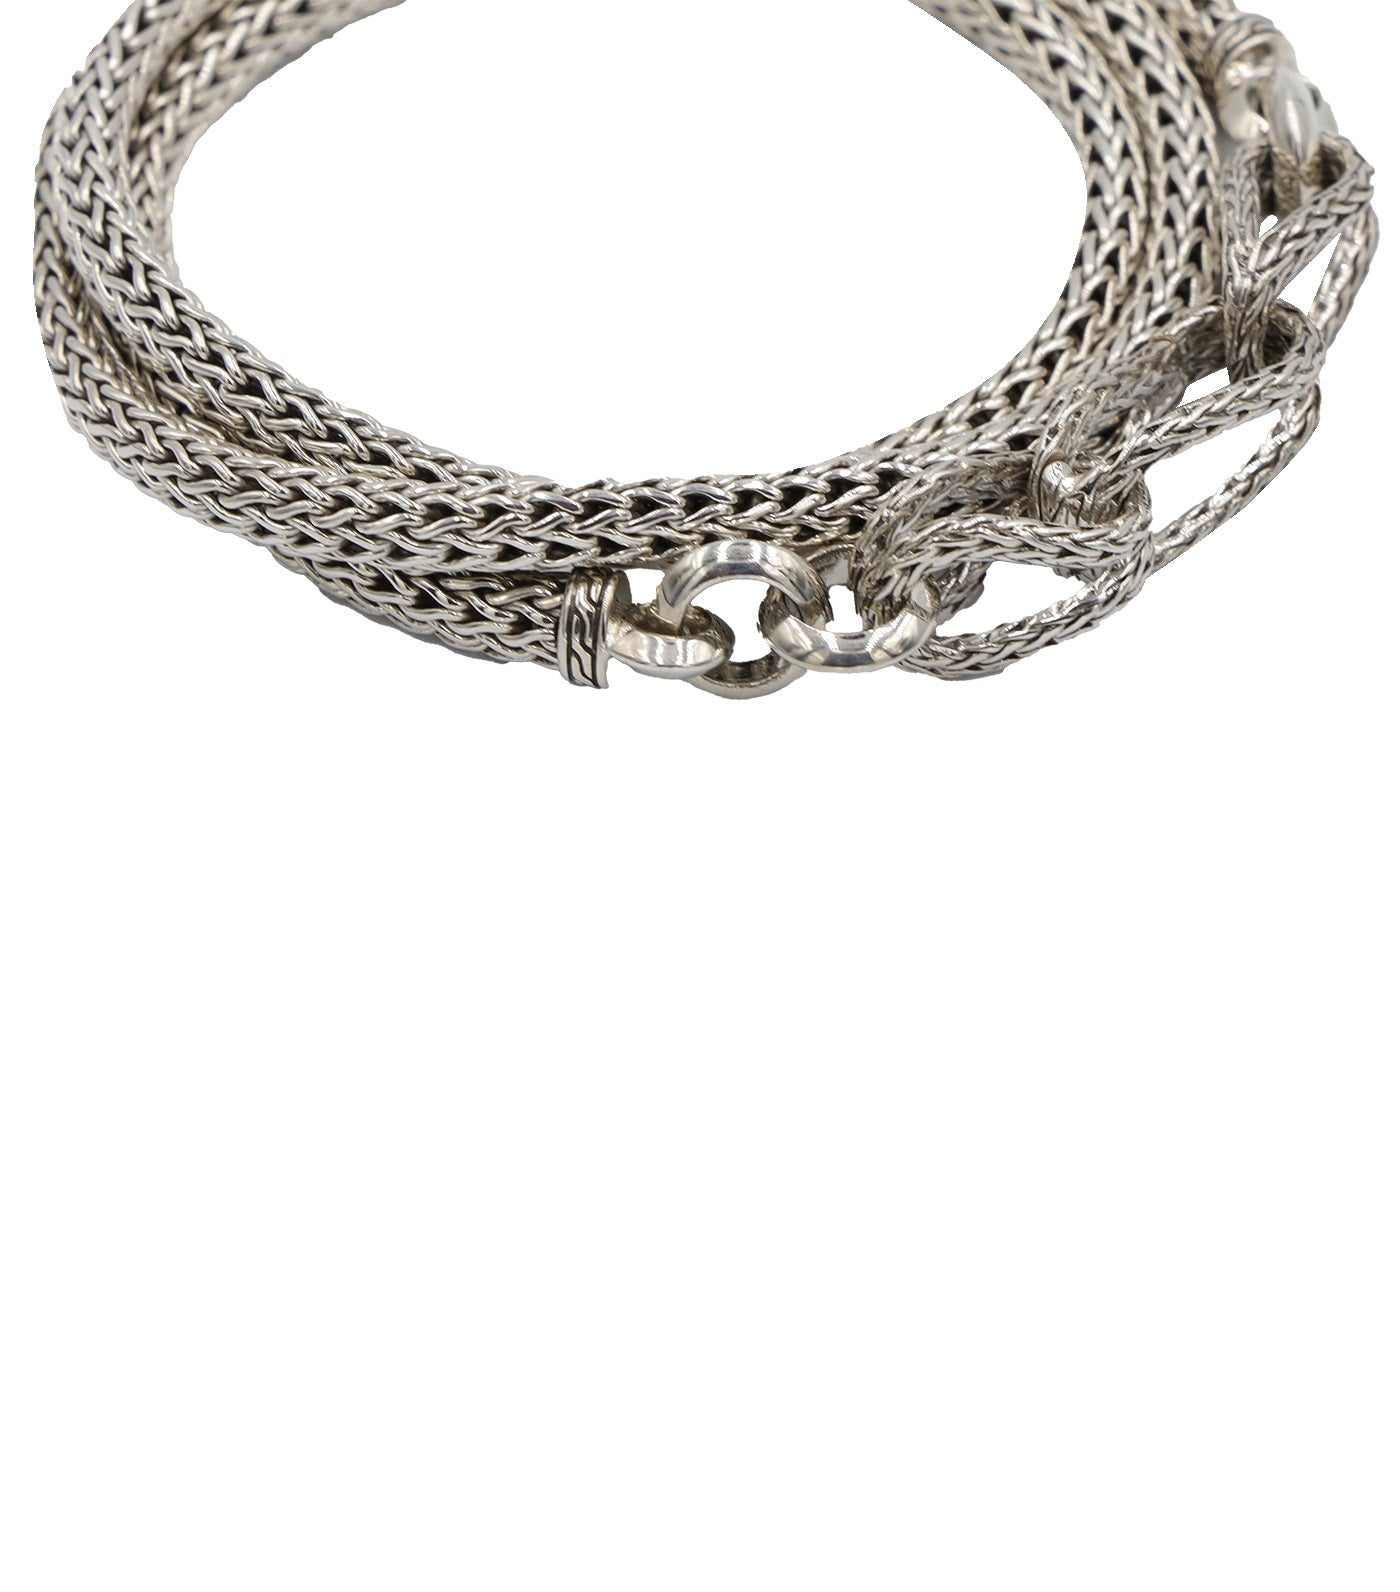 Asli Classic Chain Link Silver Extra Small Chain Transformable Bracelet with Seamless Clasp